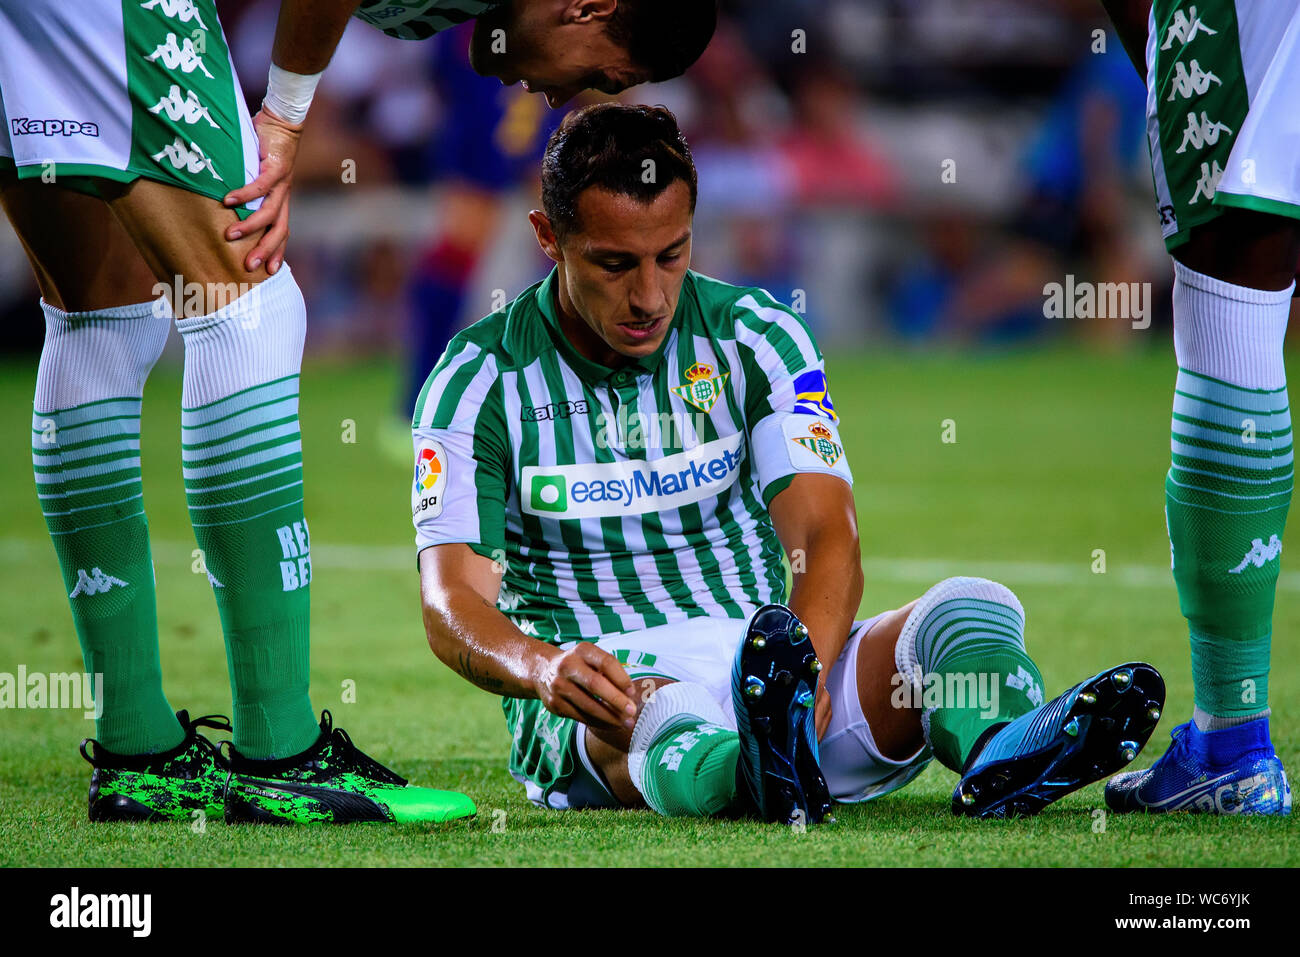 BARCELONA - AUG 25: Andres Guardado plays at the La Liga match between FC Barcelona and Real Betis at the Camp Nou Stadium on August 25, 2019 in Barce Stock Photo